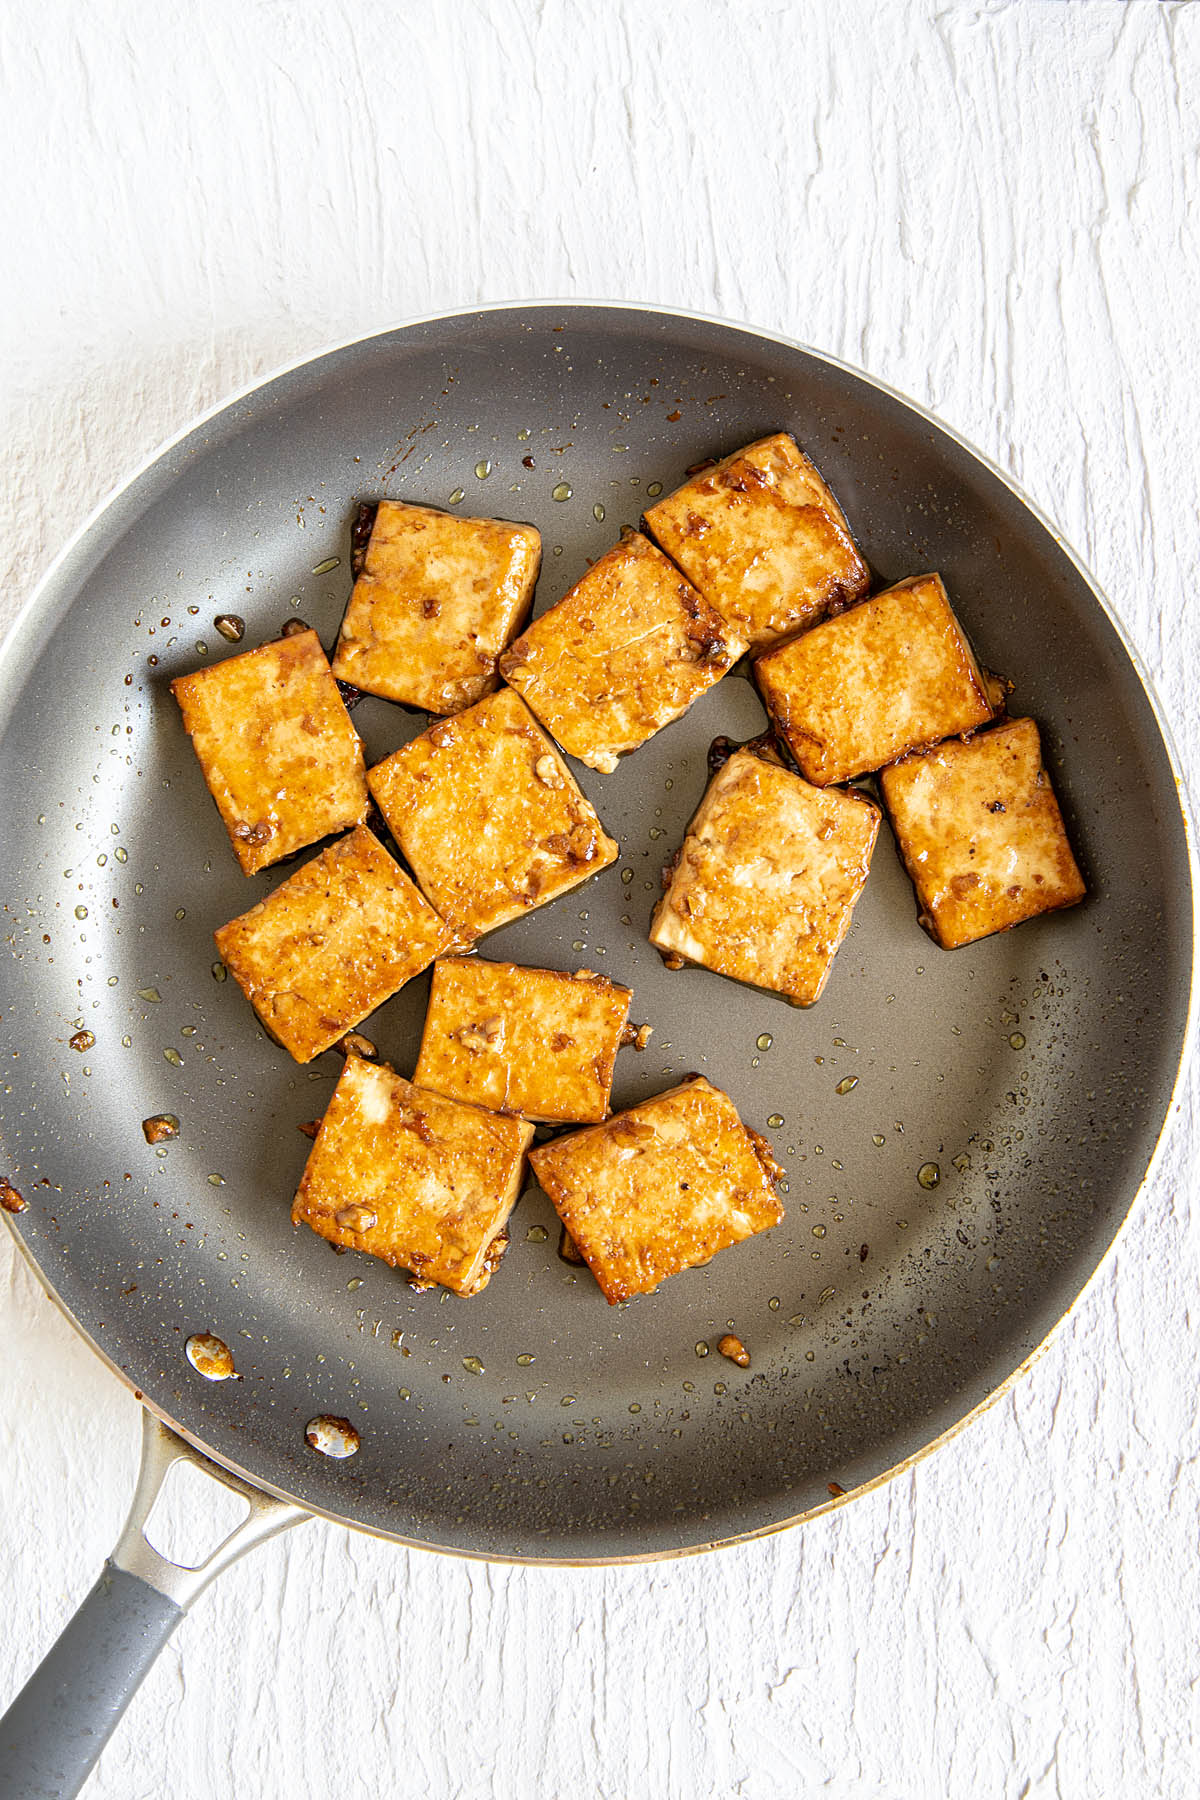 Marinated and cooked tofu in a skillet.